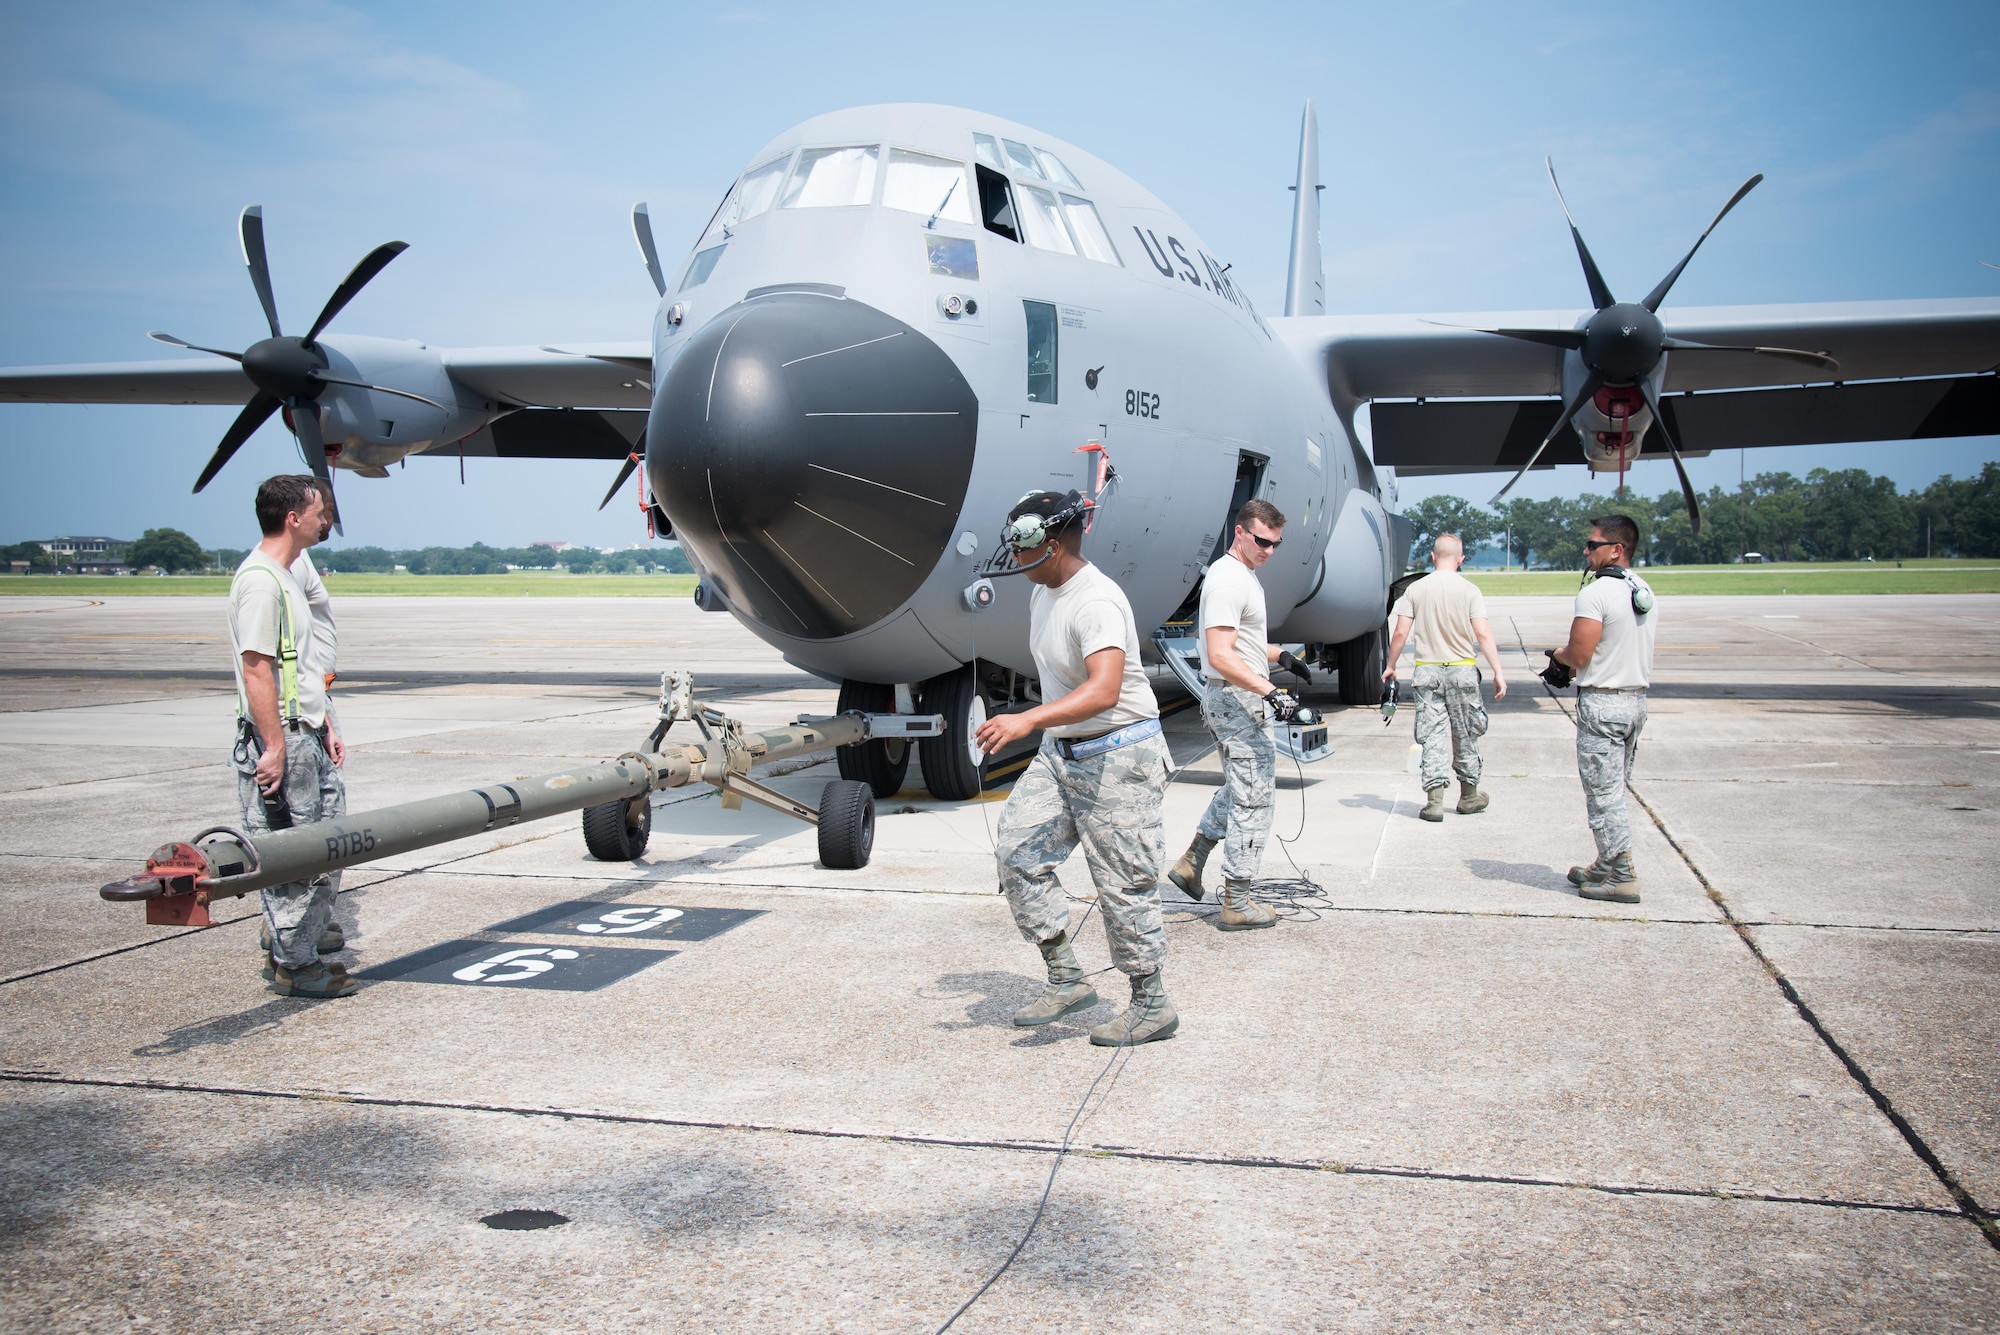 Members of the 913th Maintenance Squadron from Little Rock Air Force Base, Arkansas work together with members of the 803rd Aircraft Maintenance Squadron to hook up a C-130J Super Hercules aircraft to be towed to the wash rack July 21, 2017 at Keesler AFB, Mississippi. (U.S. Air Force photo/Staff Sgt. Heather Heiney)